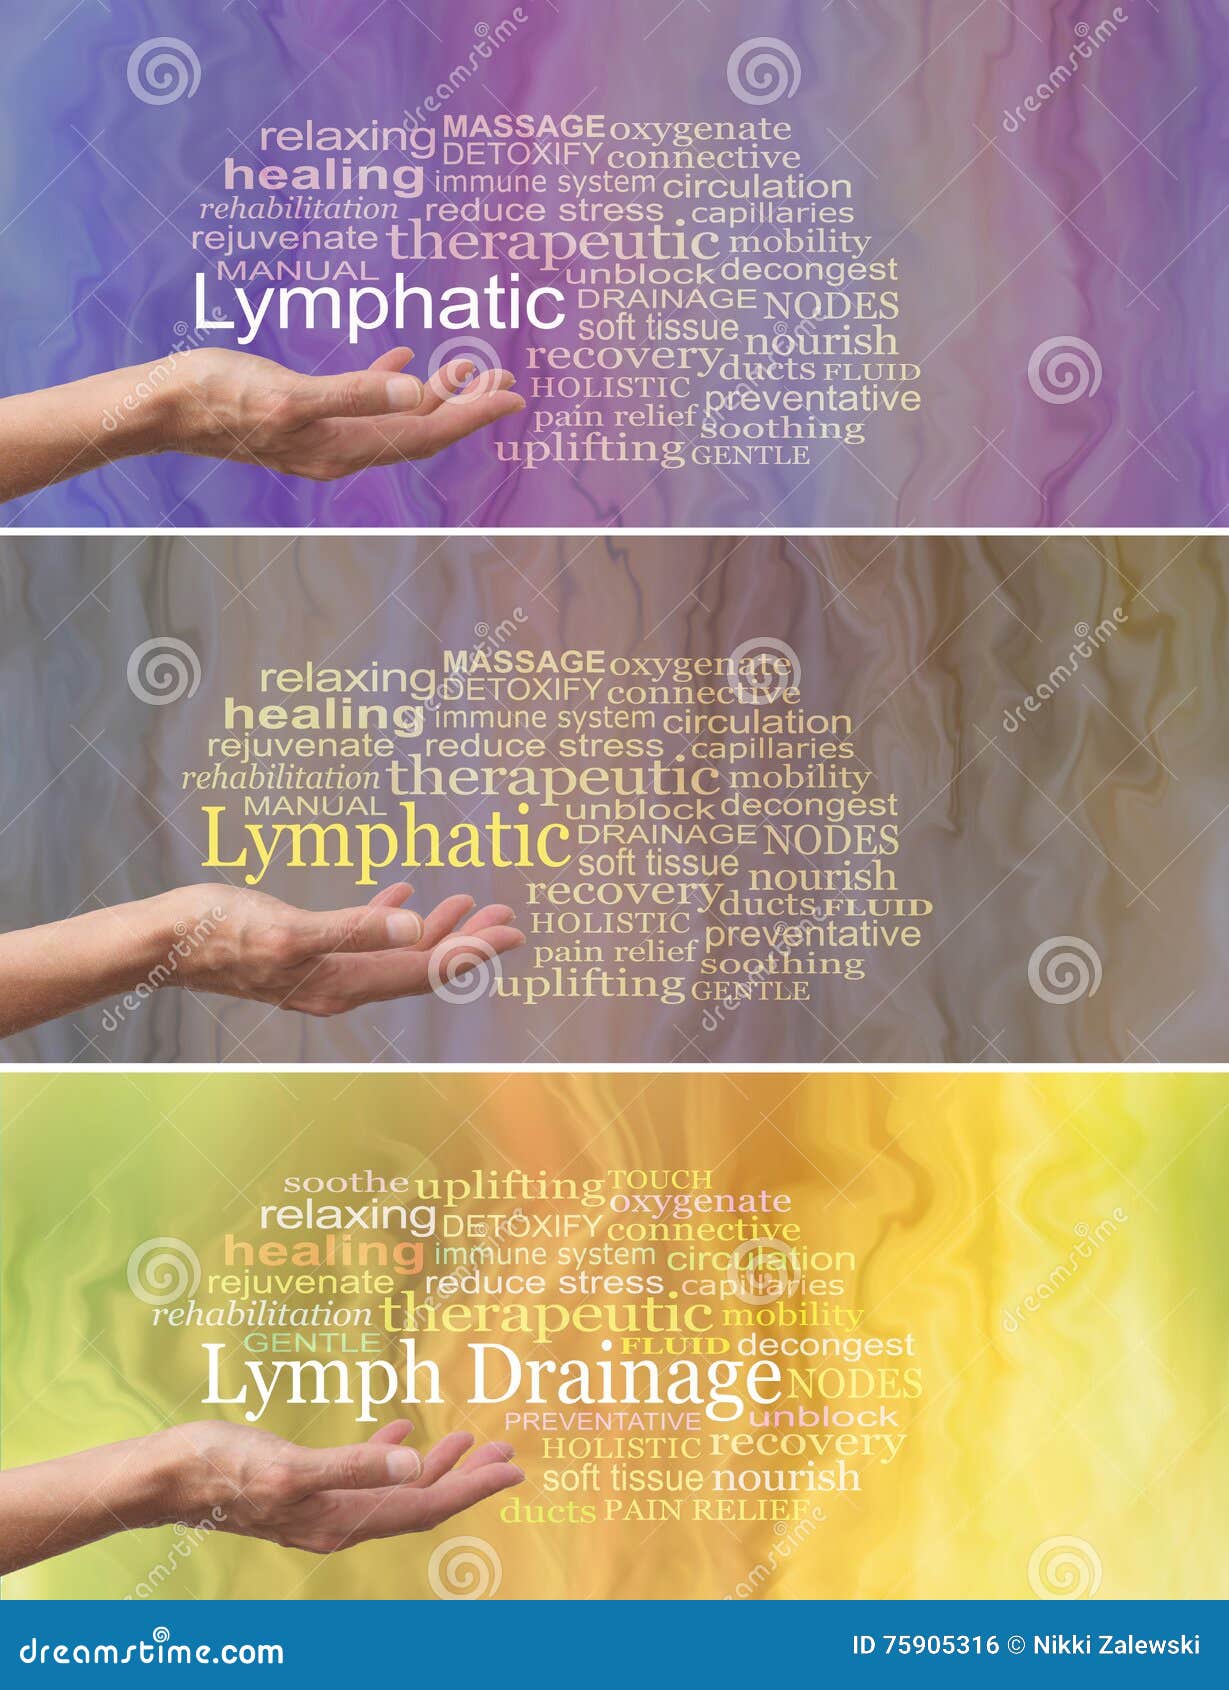 manual lymphatic drainage word cloud x 3 banners